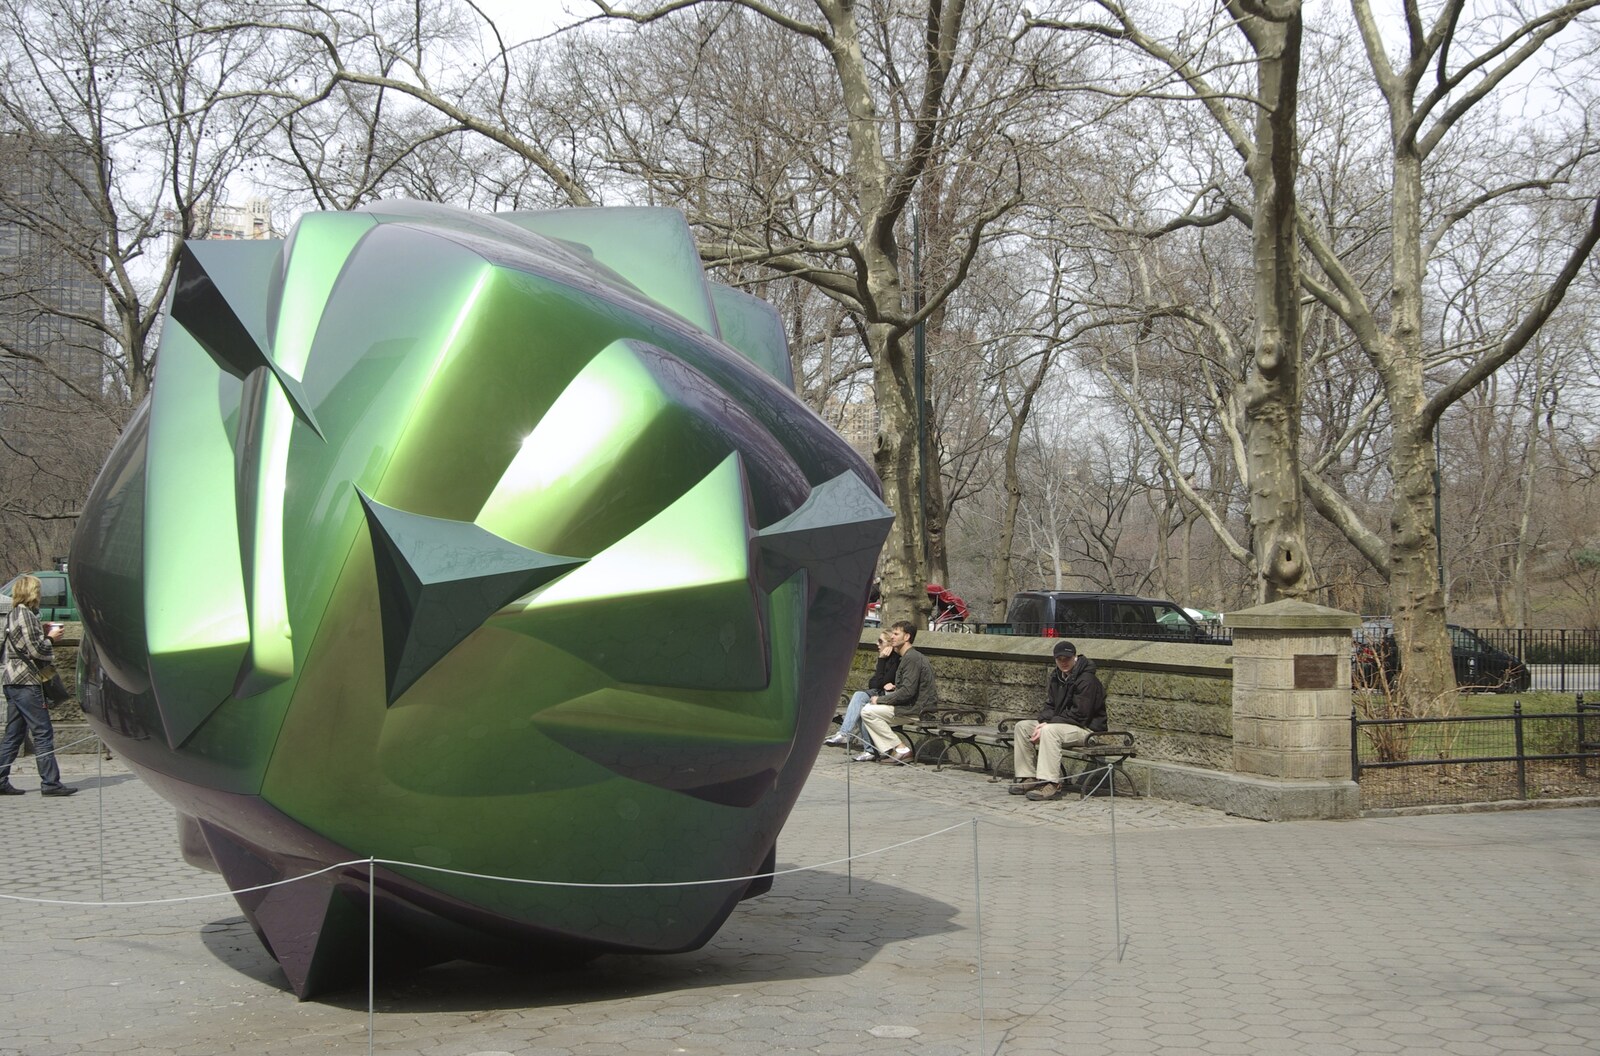 Persian Day Parade, Upper East Side and Midtown, New York, US - 25th March 2007: There's a big green sculpture on a corner of Central Park